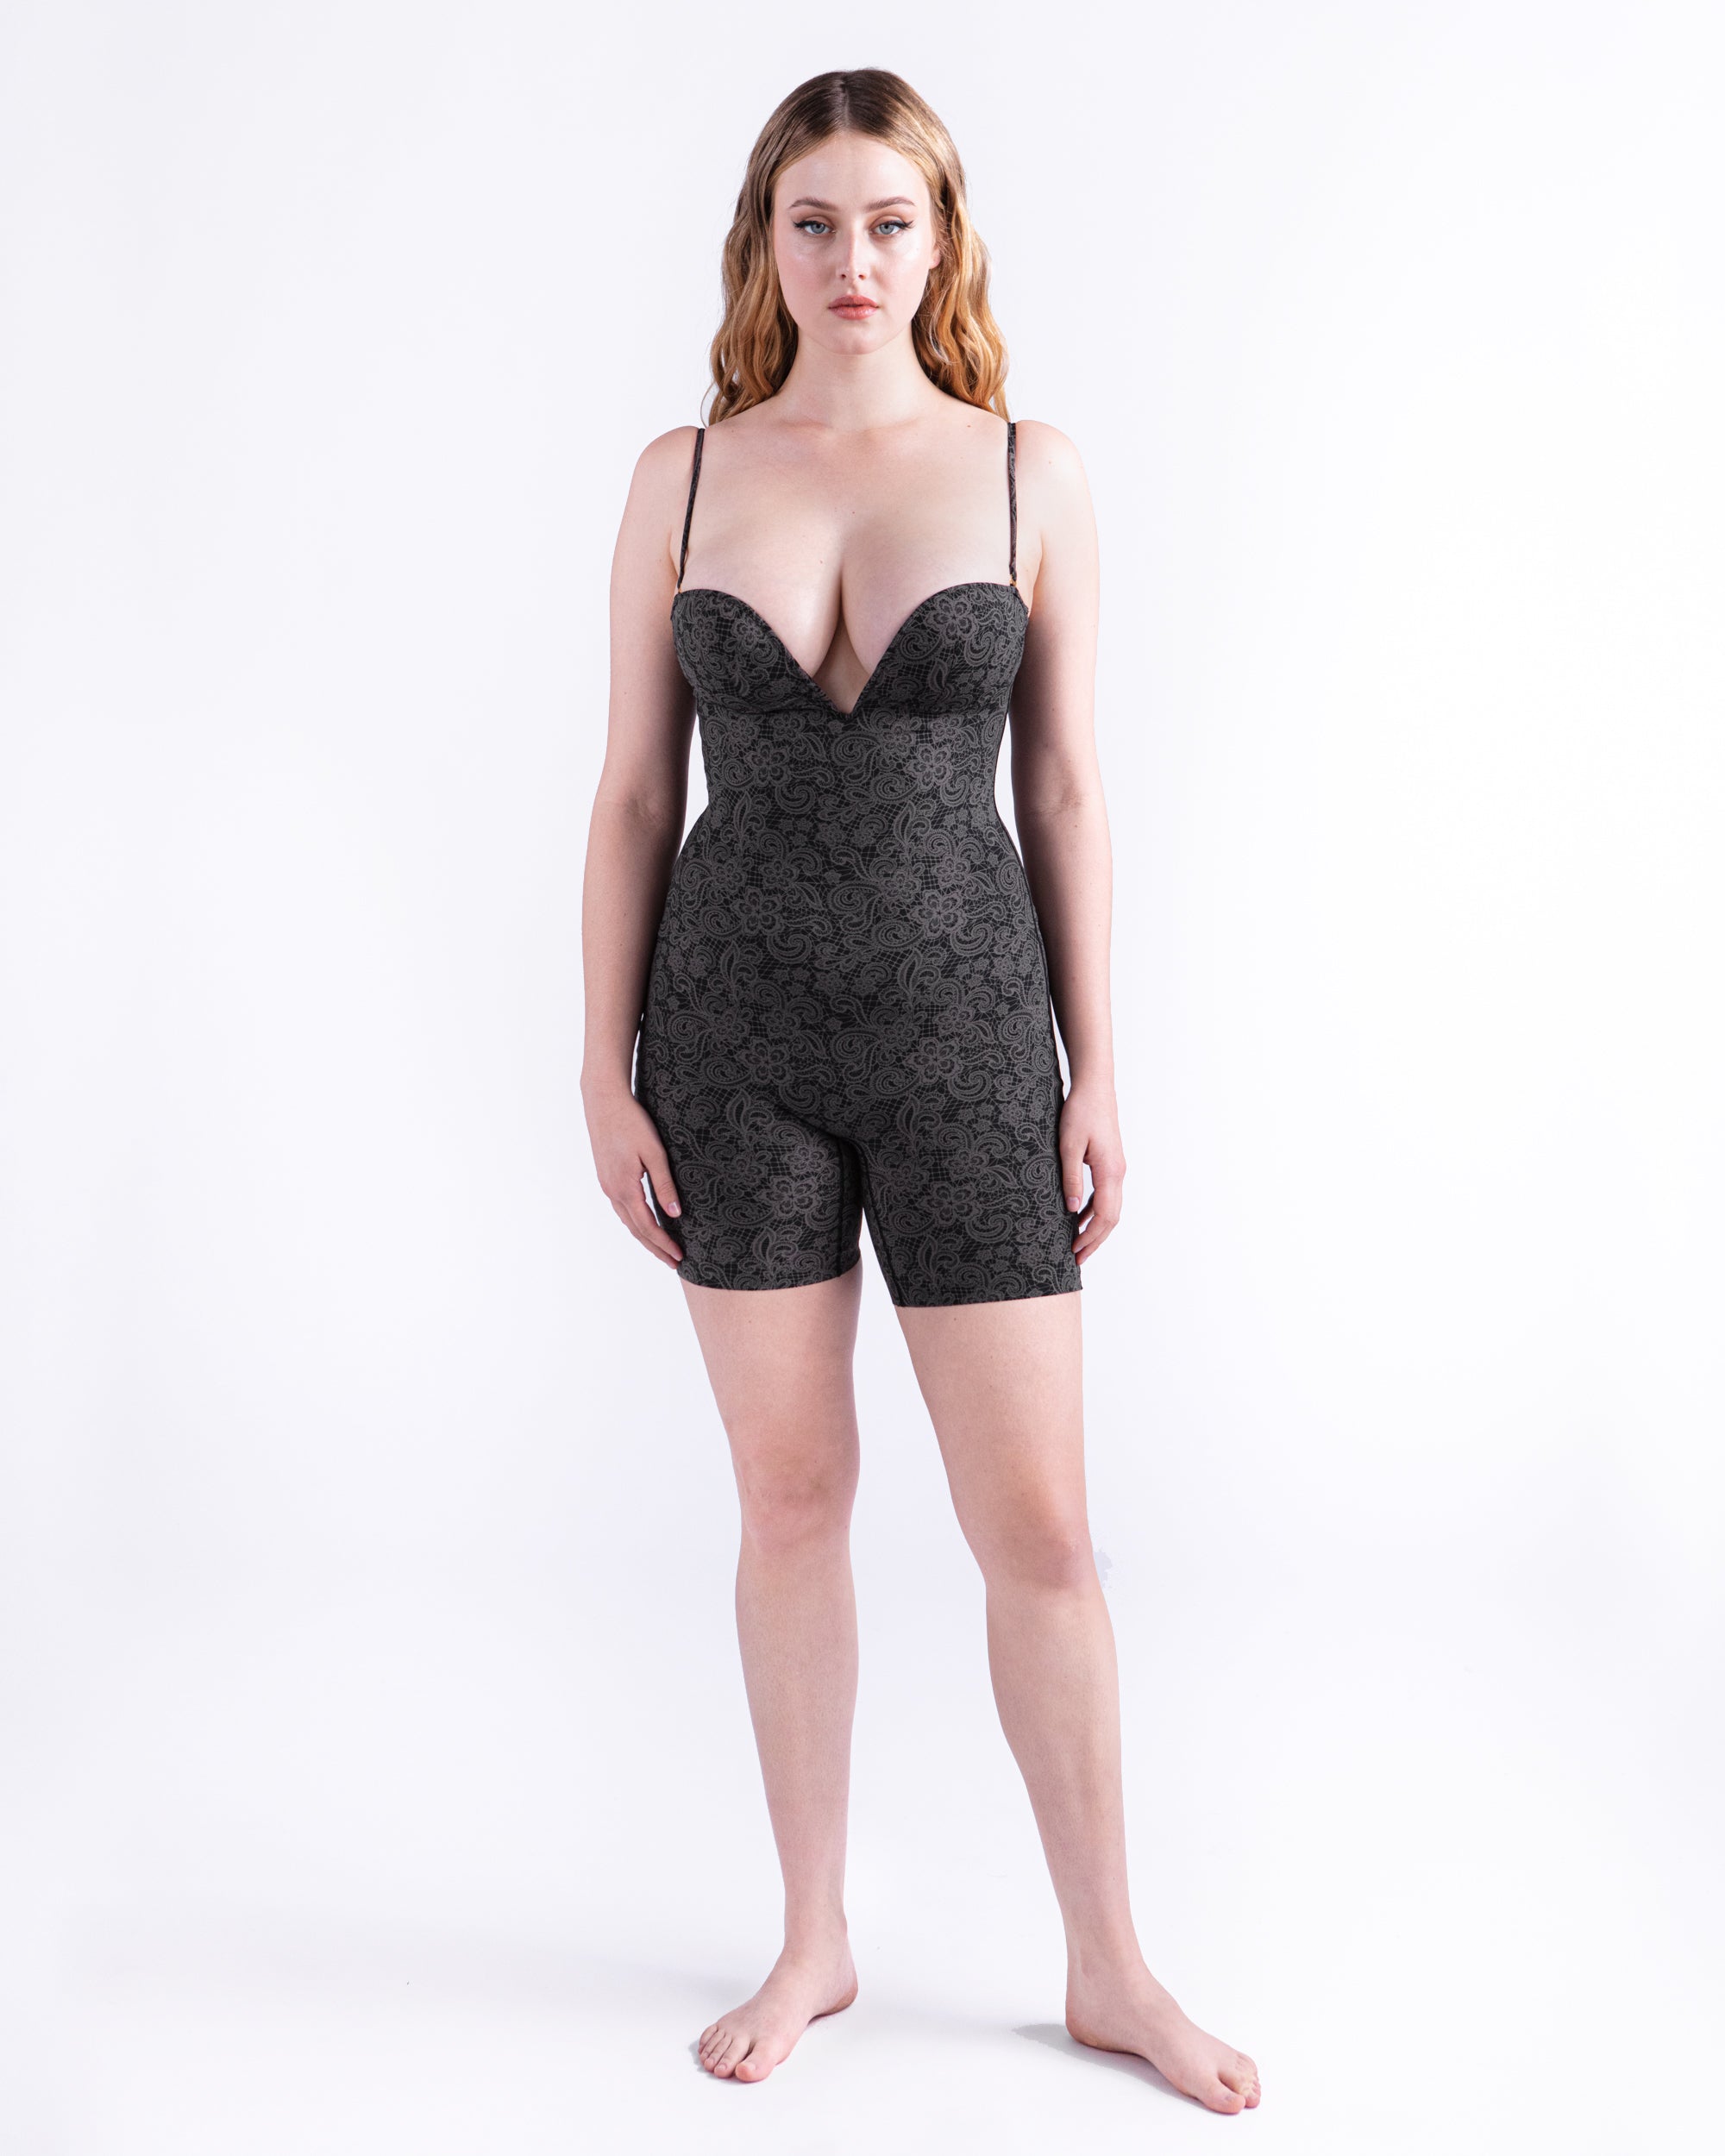 Power Slim Mid-Thigh Body Shaper - Contour Your Body